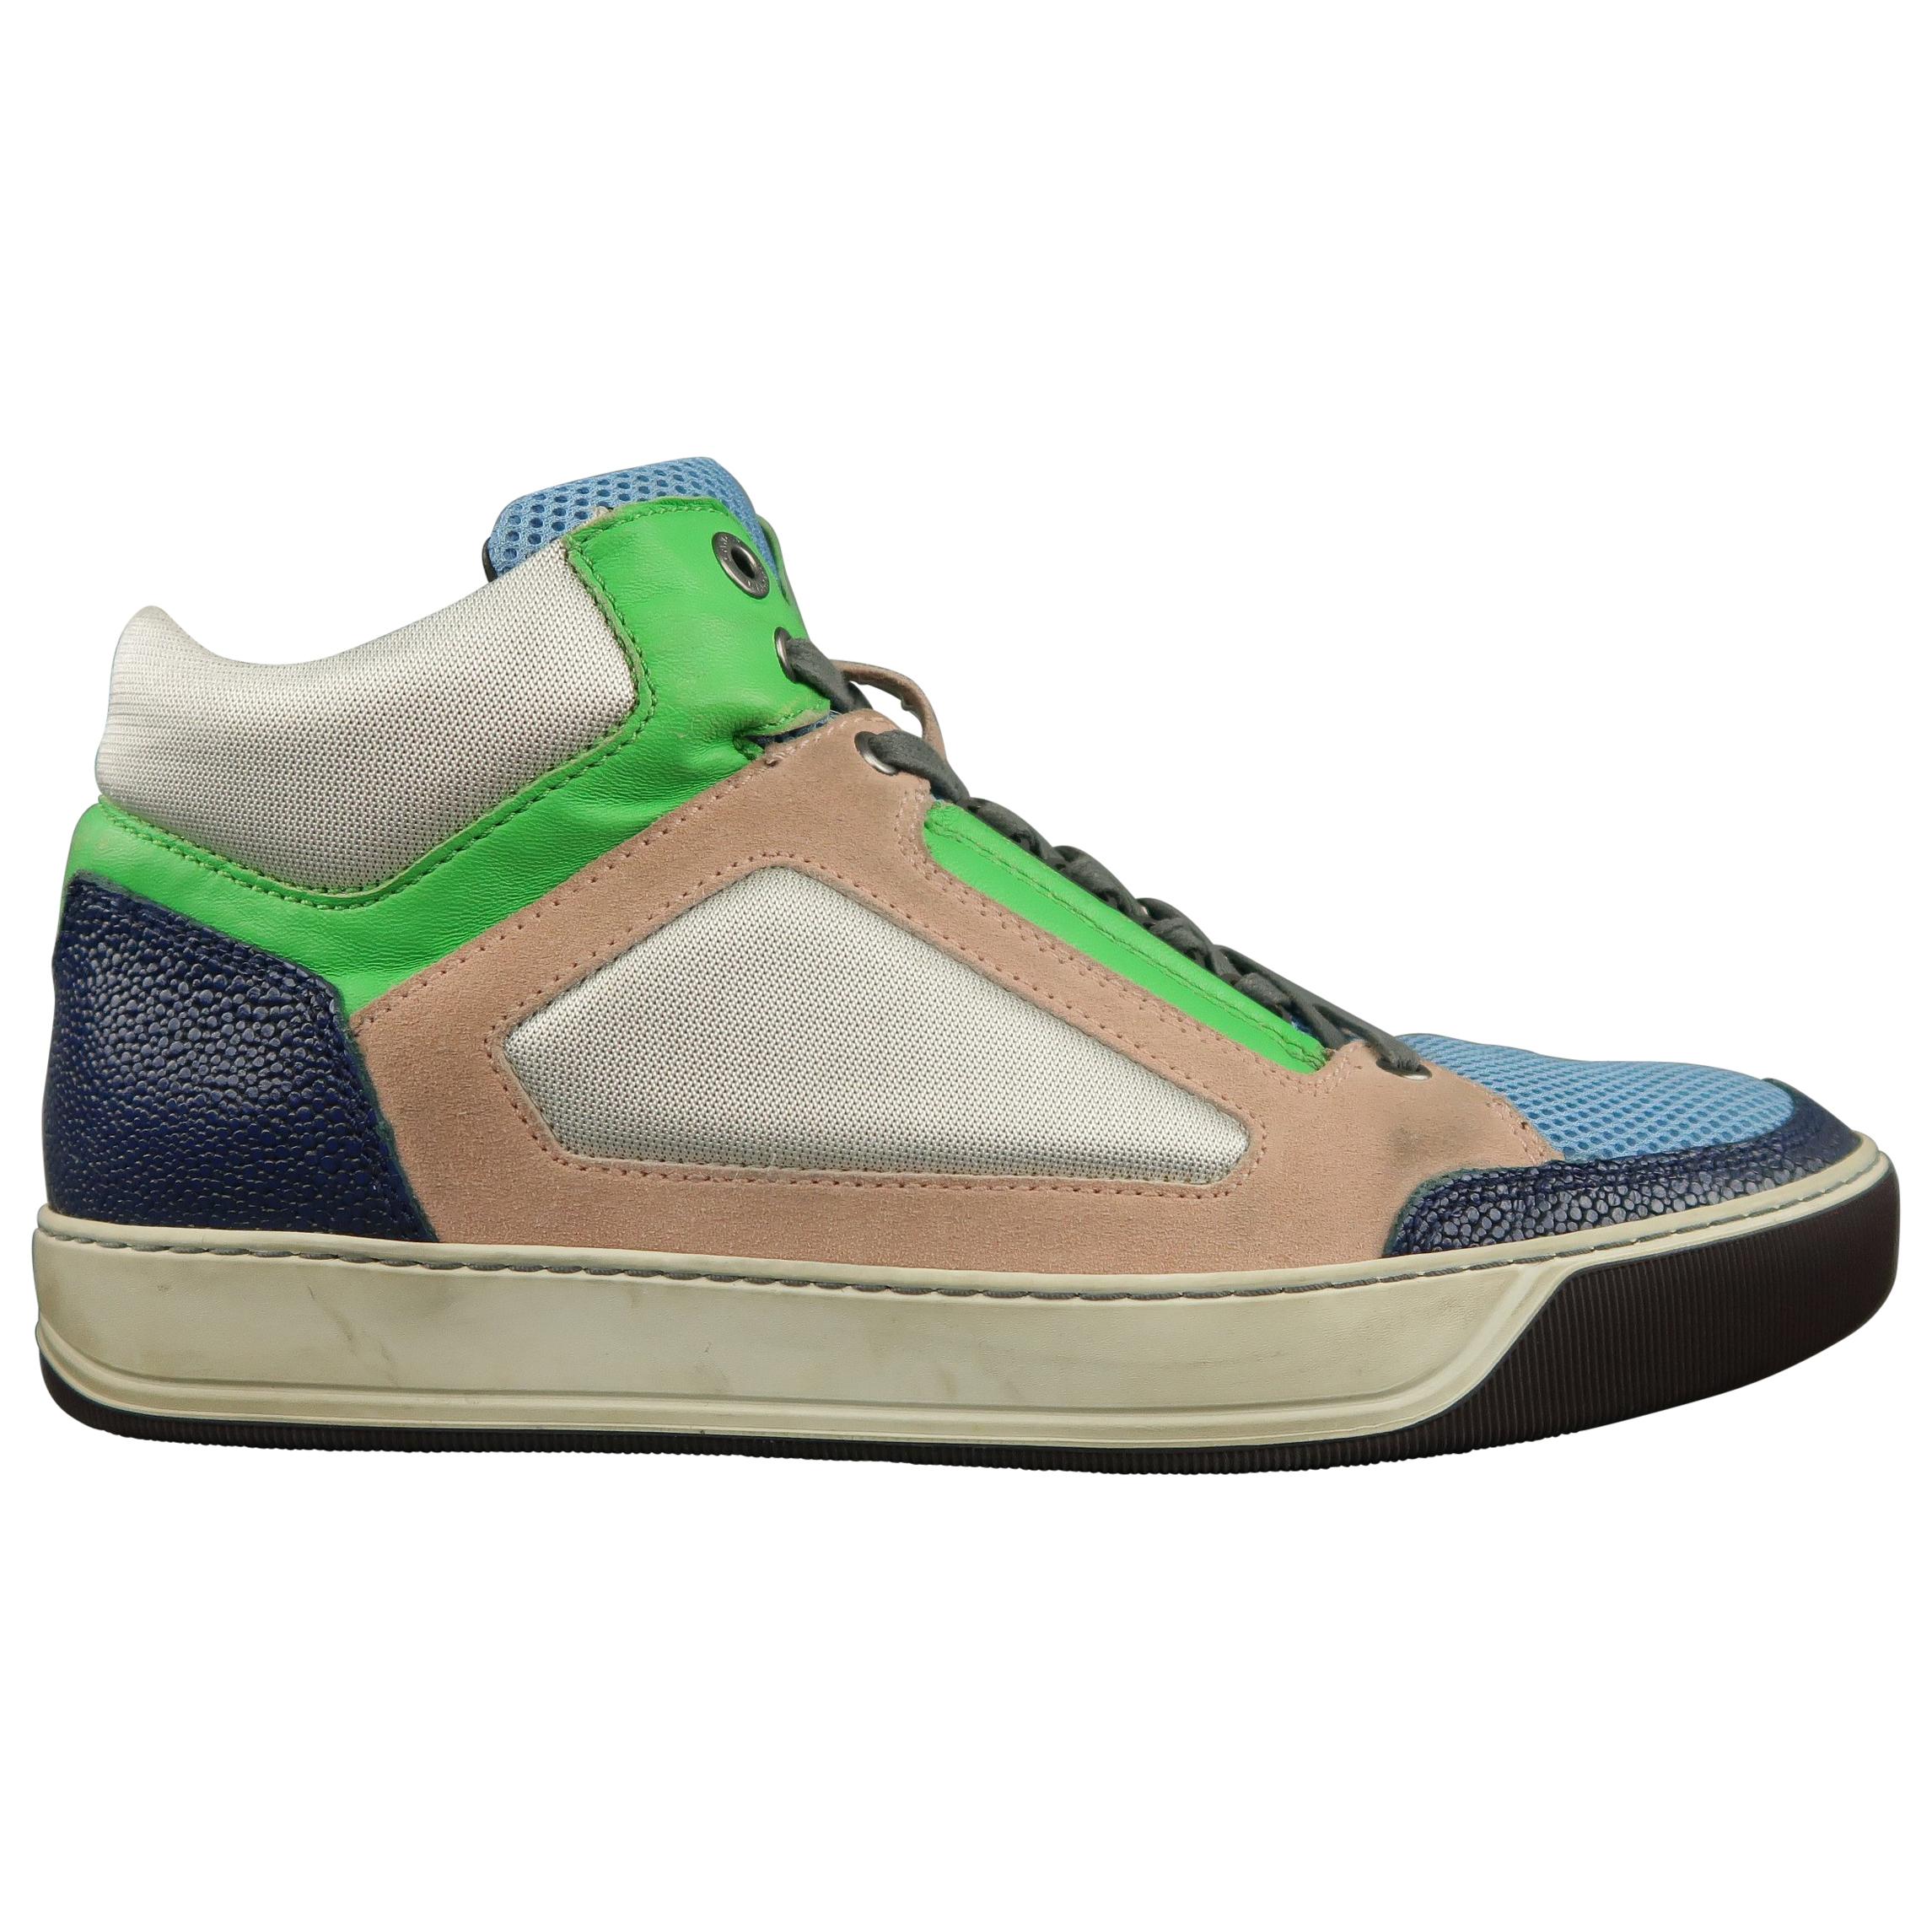 Men's LANVIN Size 11 Silver Pink Blue & Green Color Block High Top Sneakers